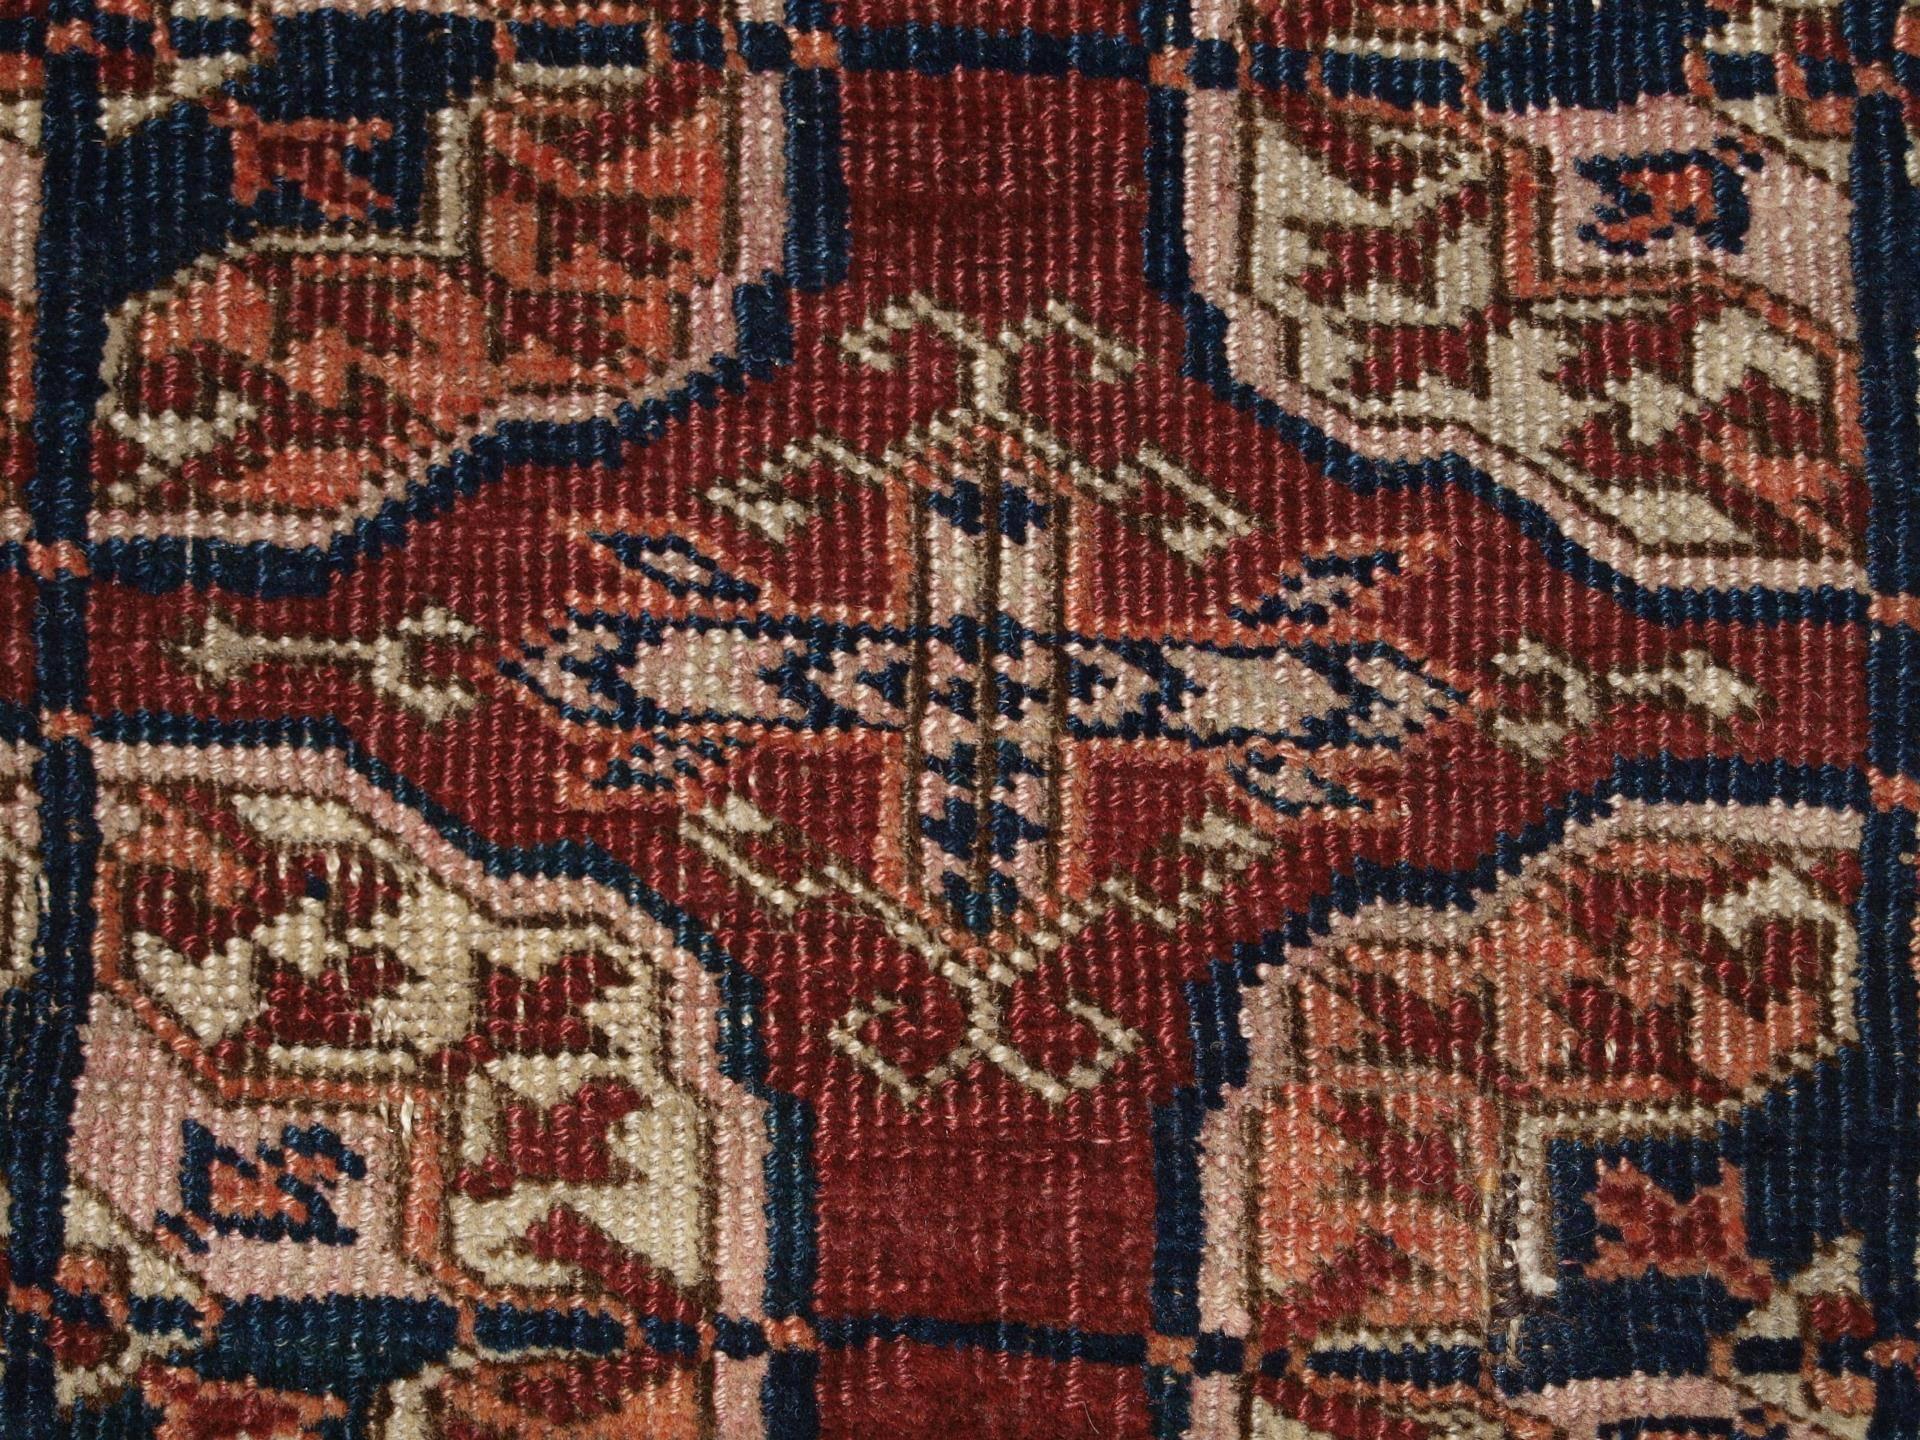 Antique Tekke Turkmen ‘dowry’ rug, small square size, circa 1900
Size: 4ft 0in x 3ft 10in (122 x 117cm).

Antique Tekke Turkmen rug of Fine weave and small square size. 

  

These rugs are considered to be ‘dowry’ weavings used by the